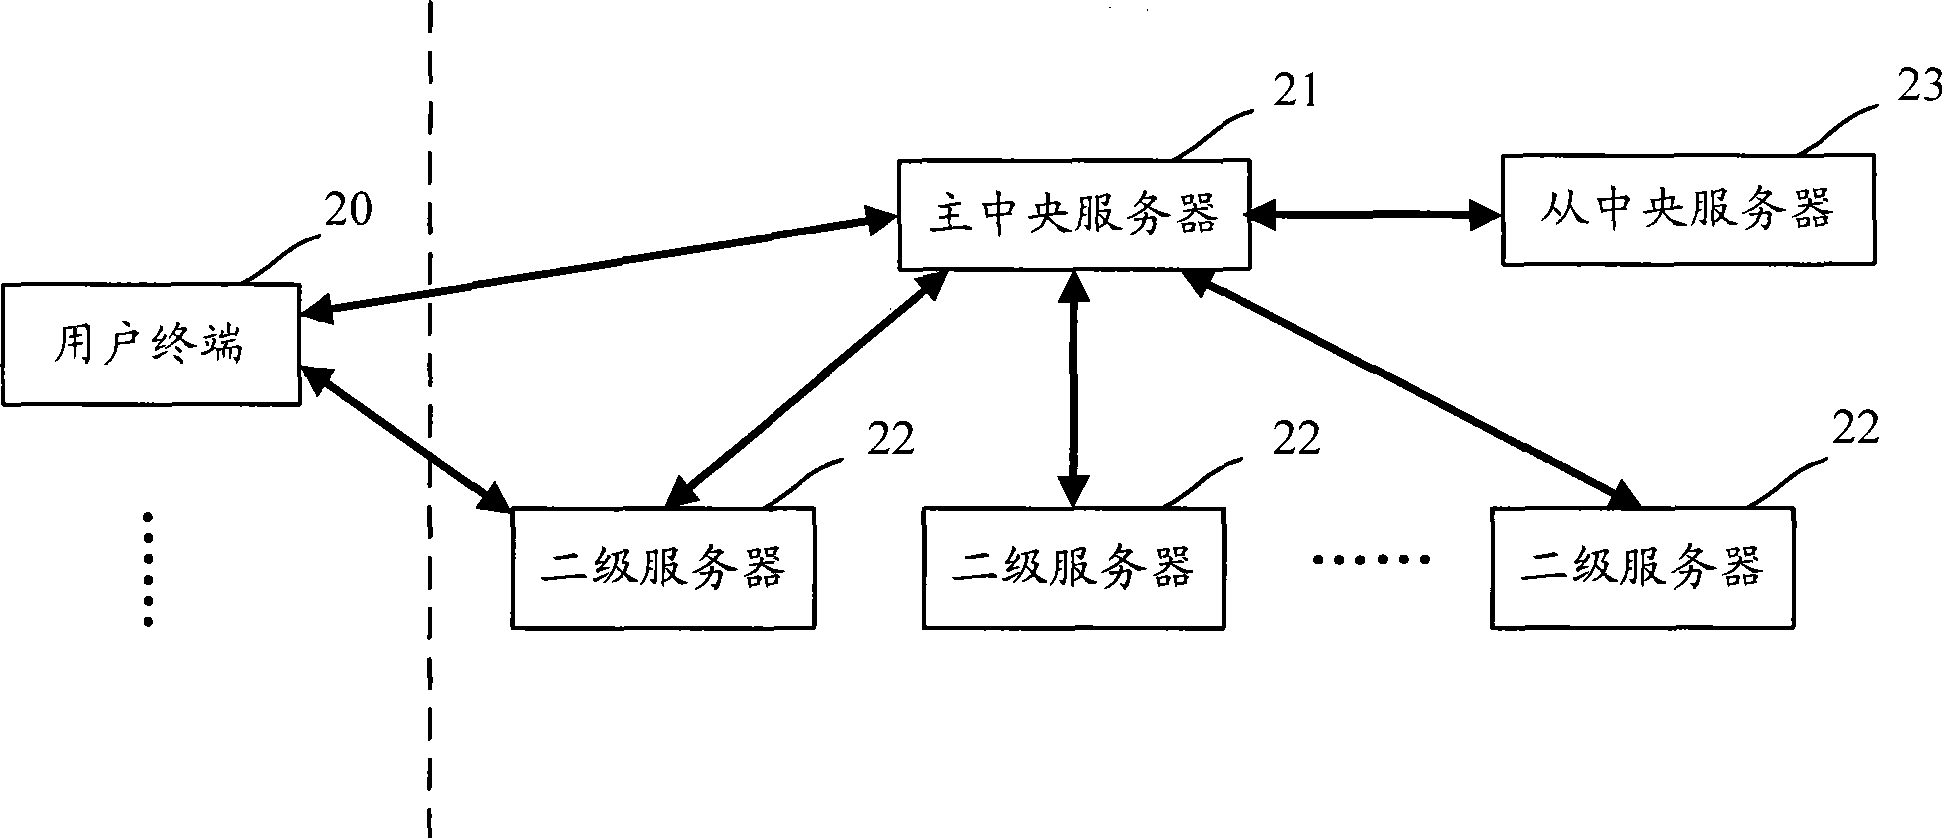 Multimedia resource acquisition method, apparatus and system